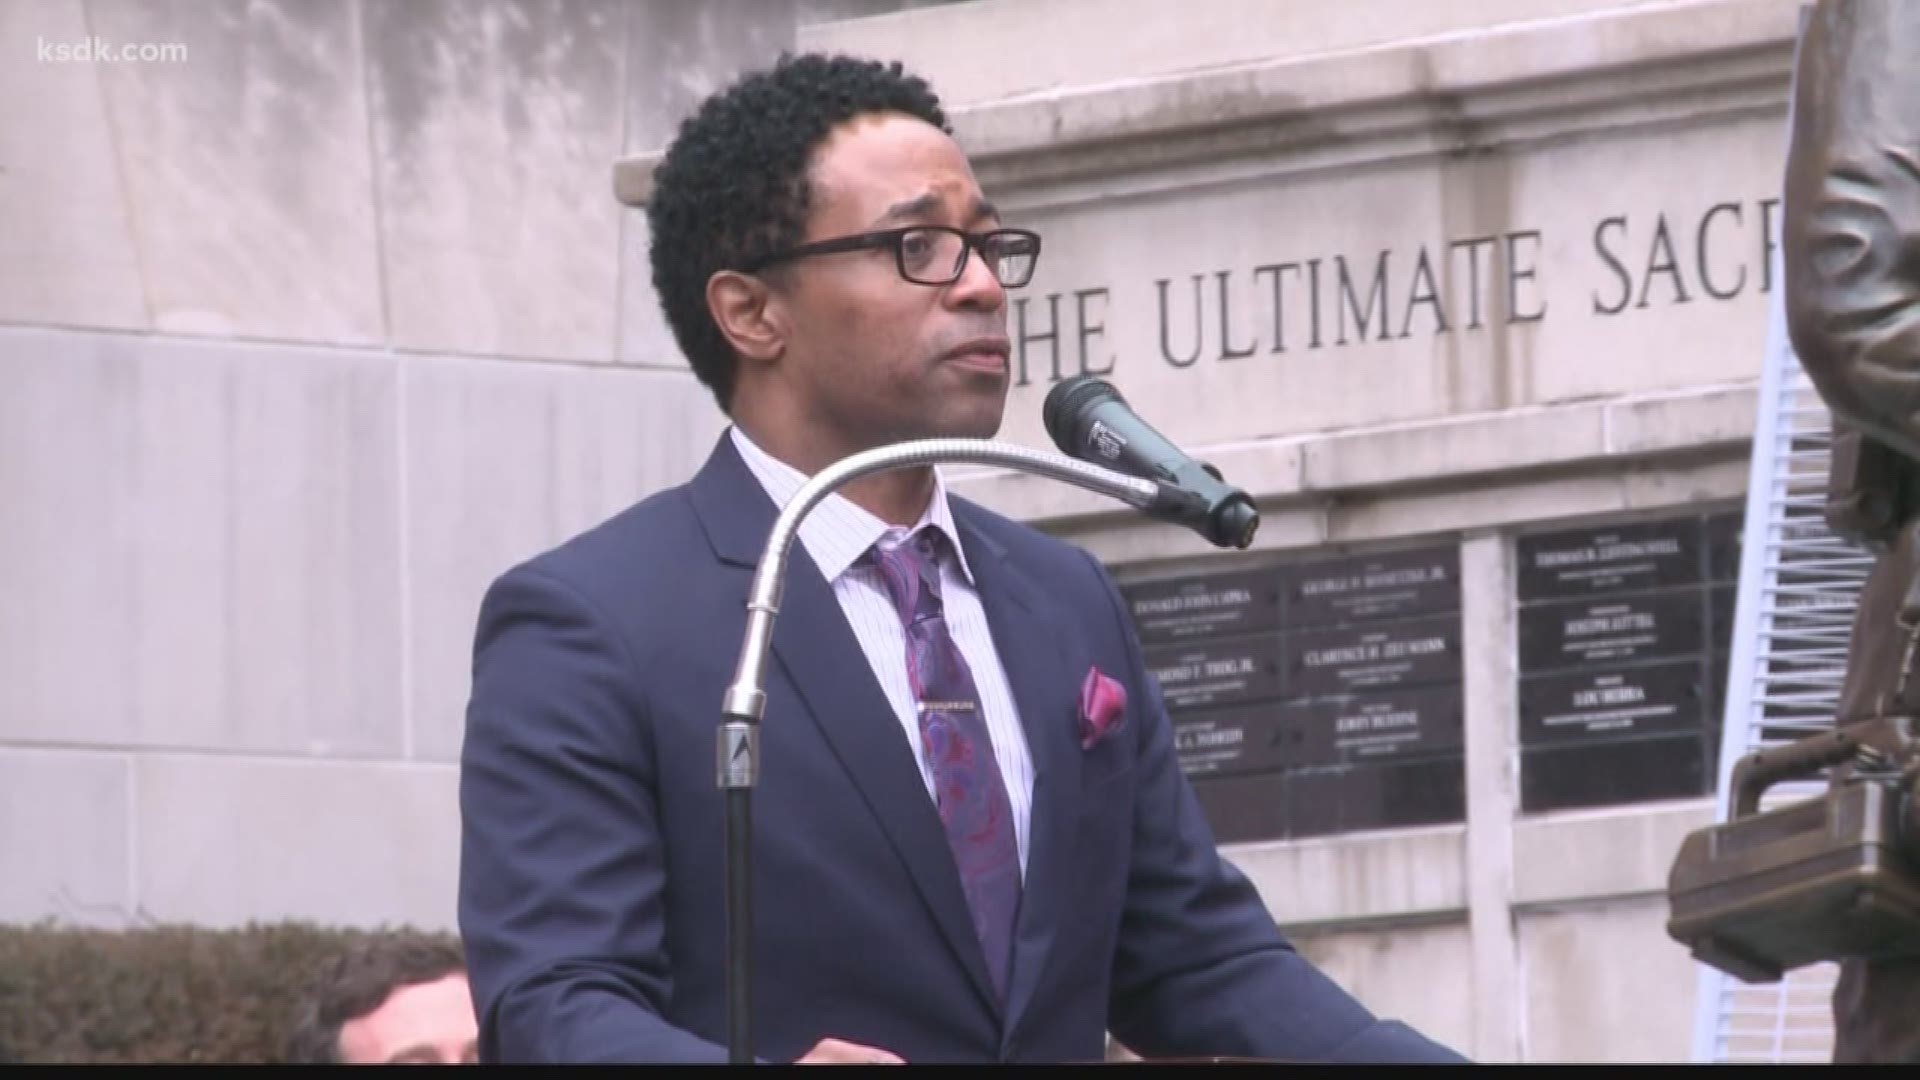 St. Louis County Prosecutor Wesley Bell has only been in office for a week, but he's about to announce even more changes to how crimes are handled.